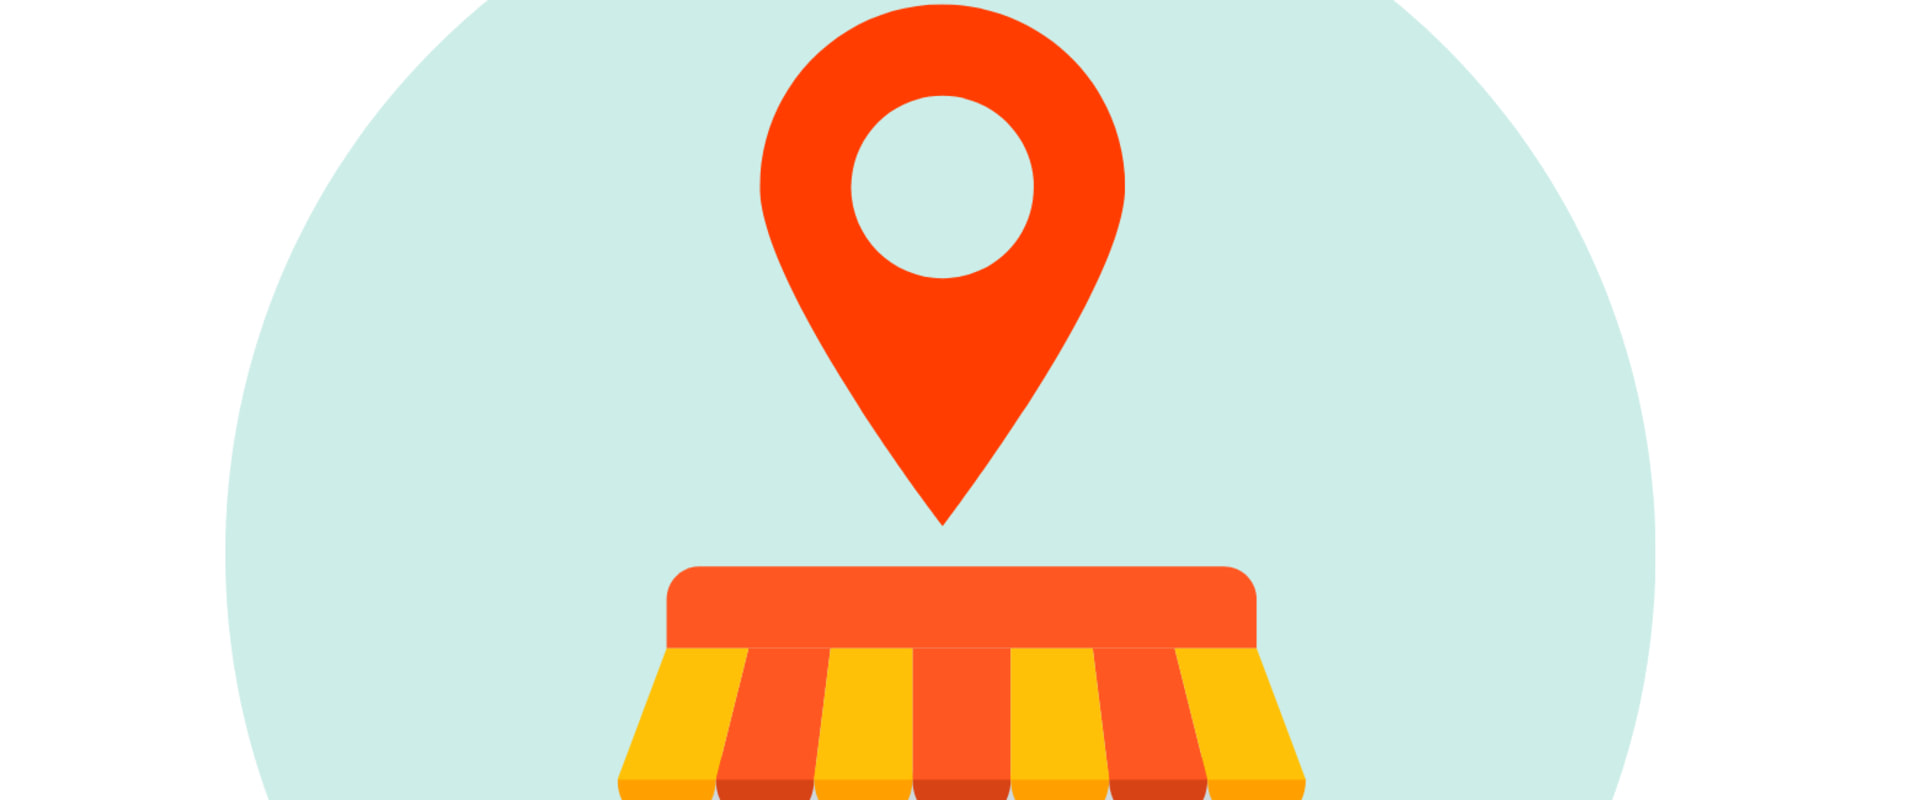 What is meant by local search?